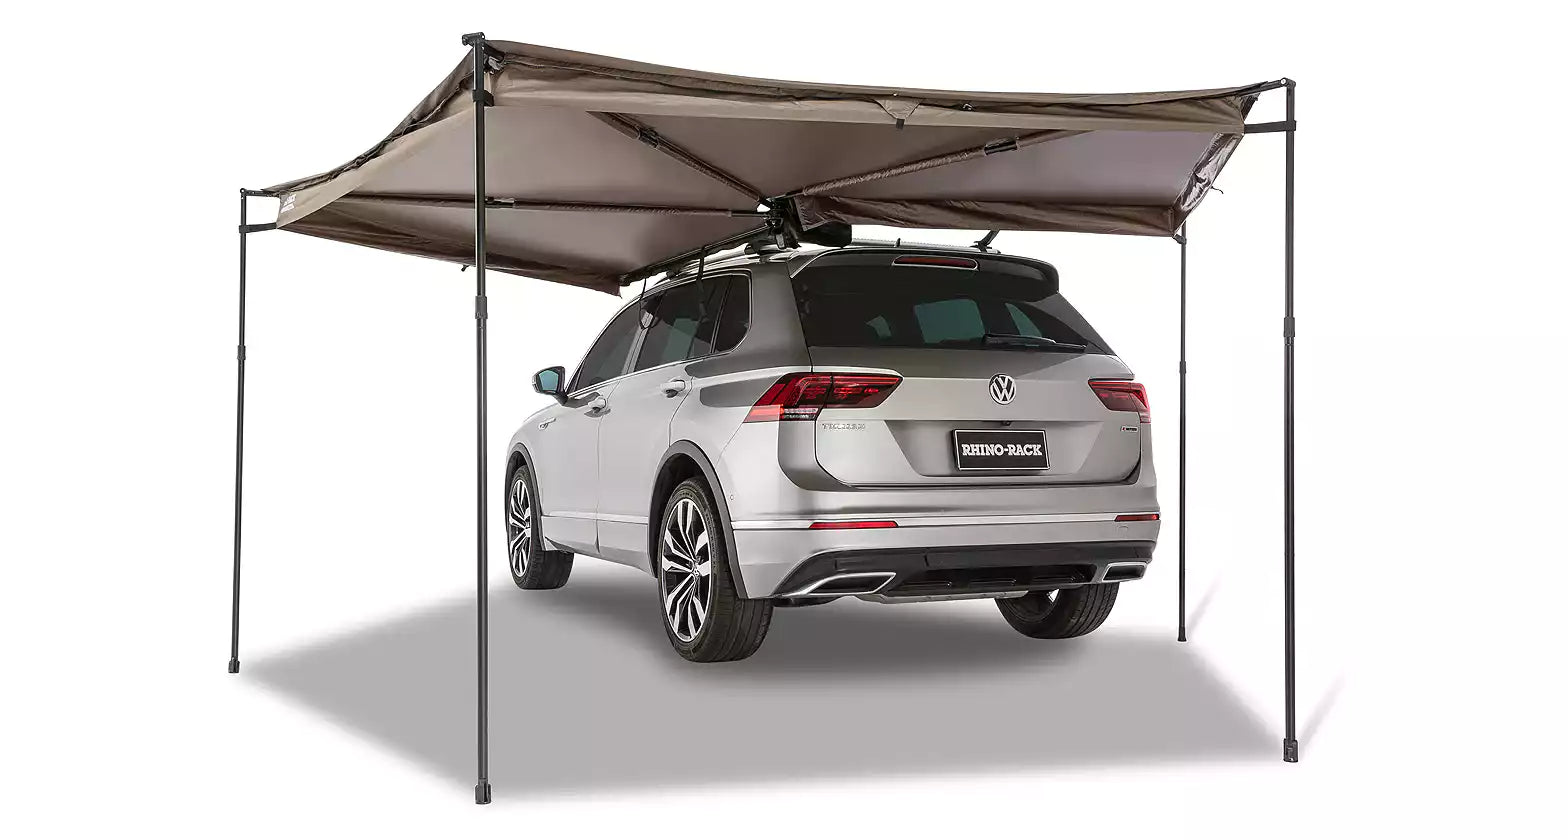 Awning compact Rhinorack 2m for Offroad